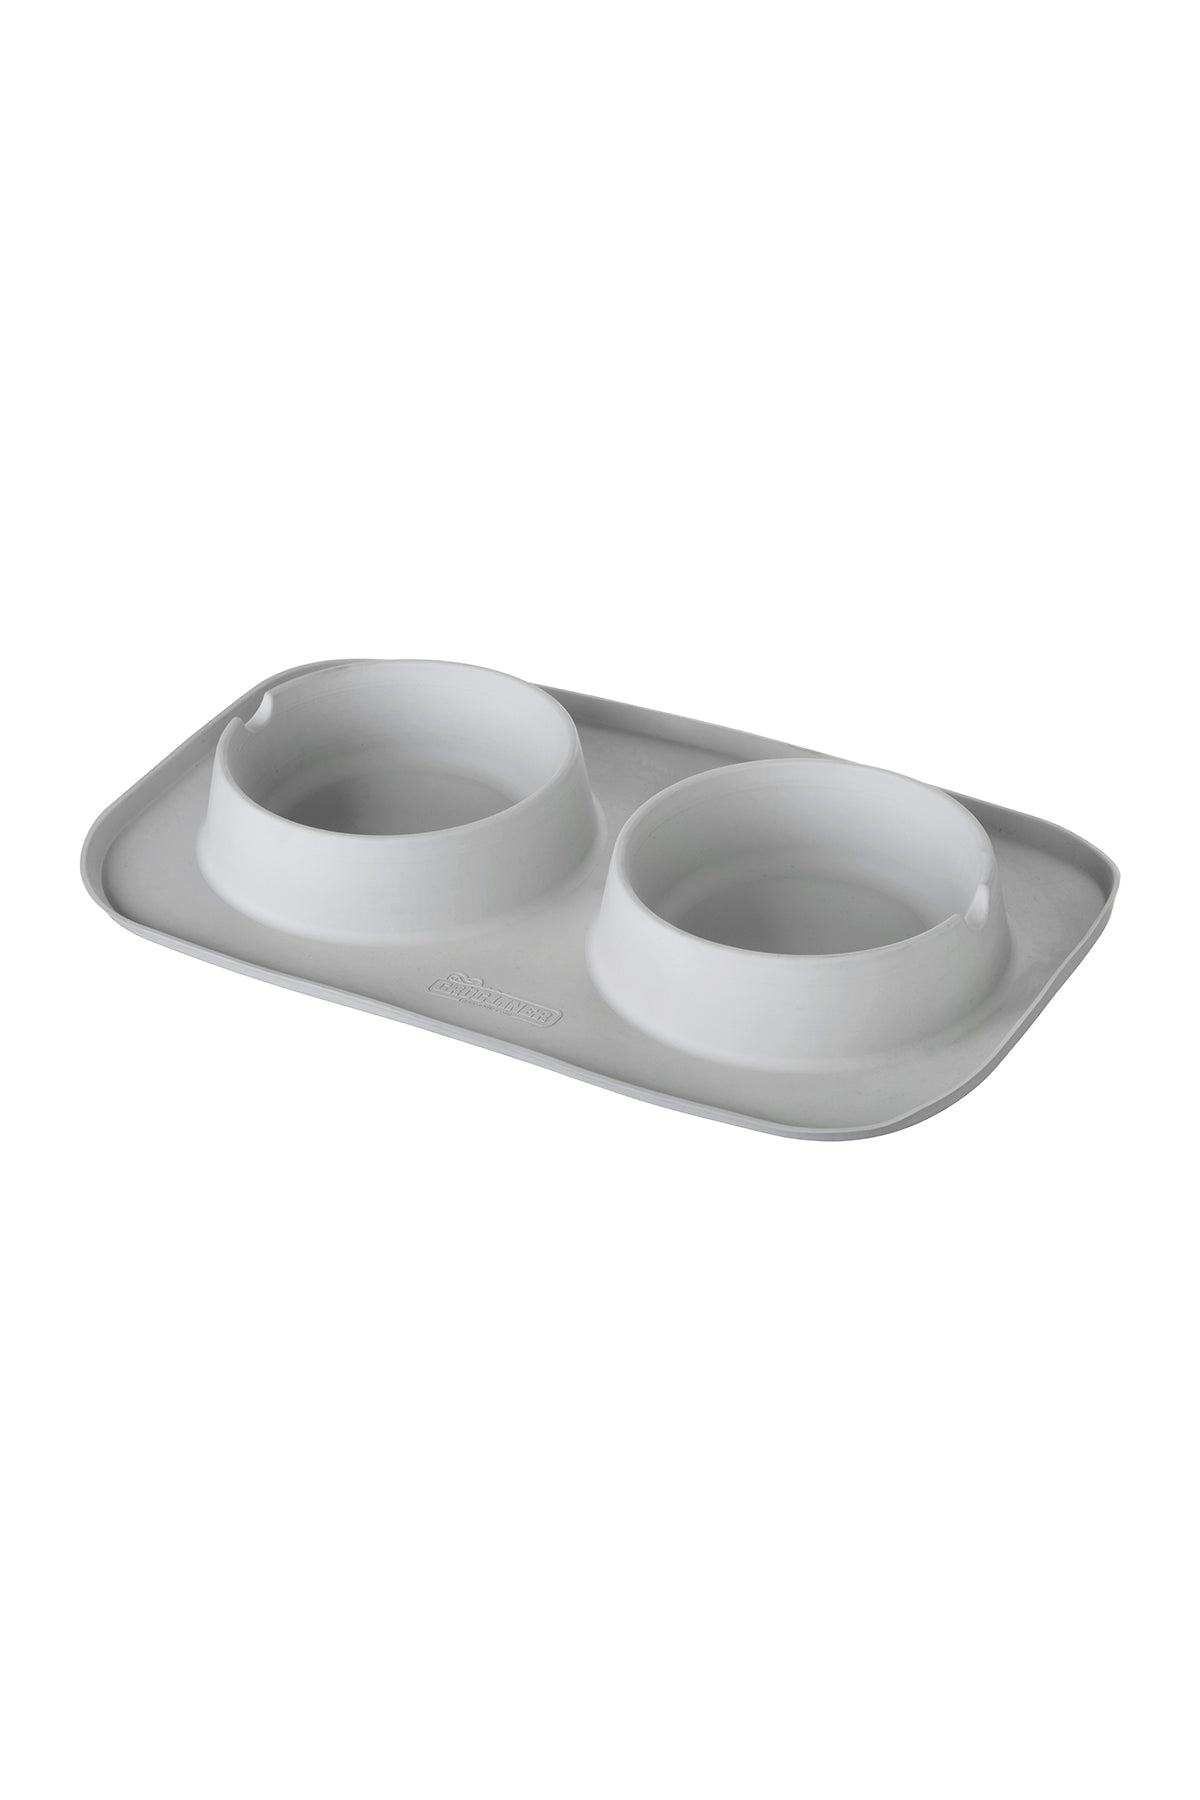 Pet Feeding System with both bowls removed.